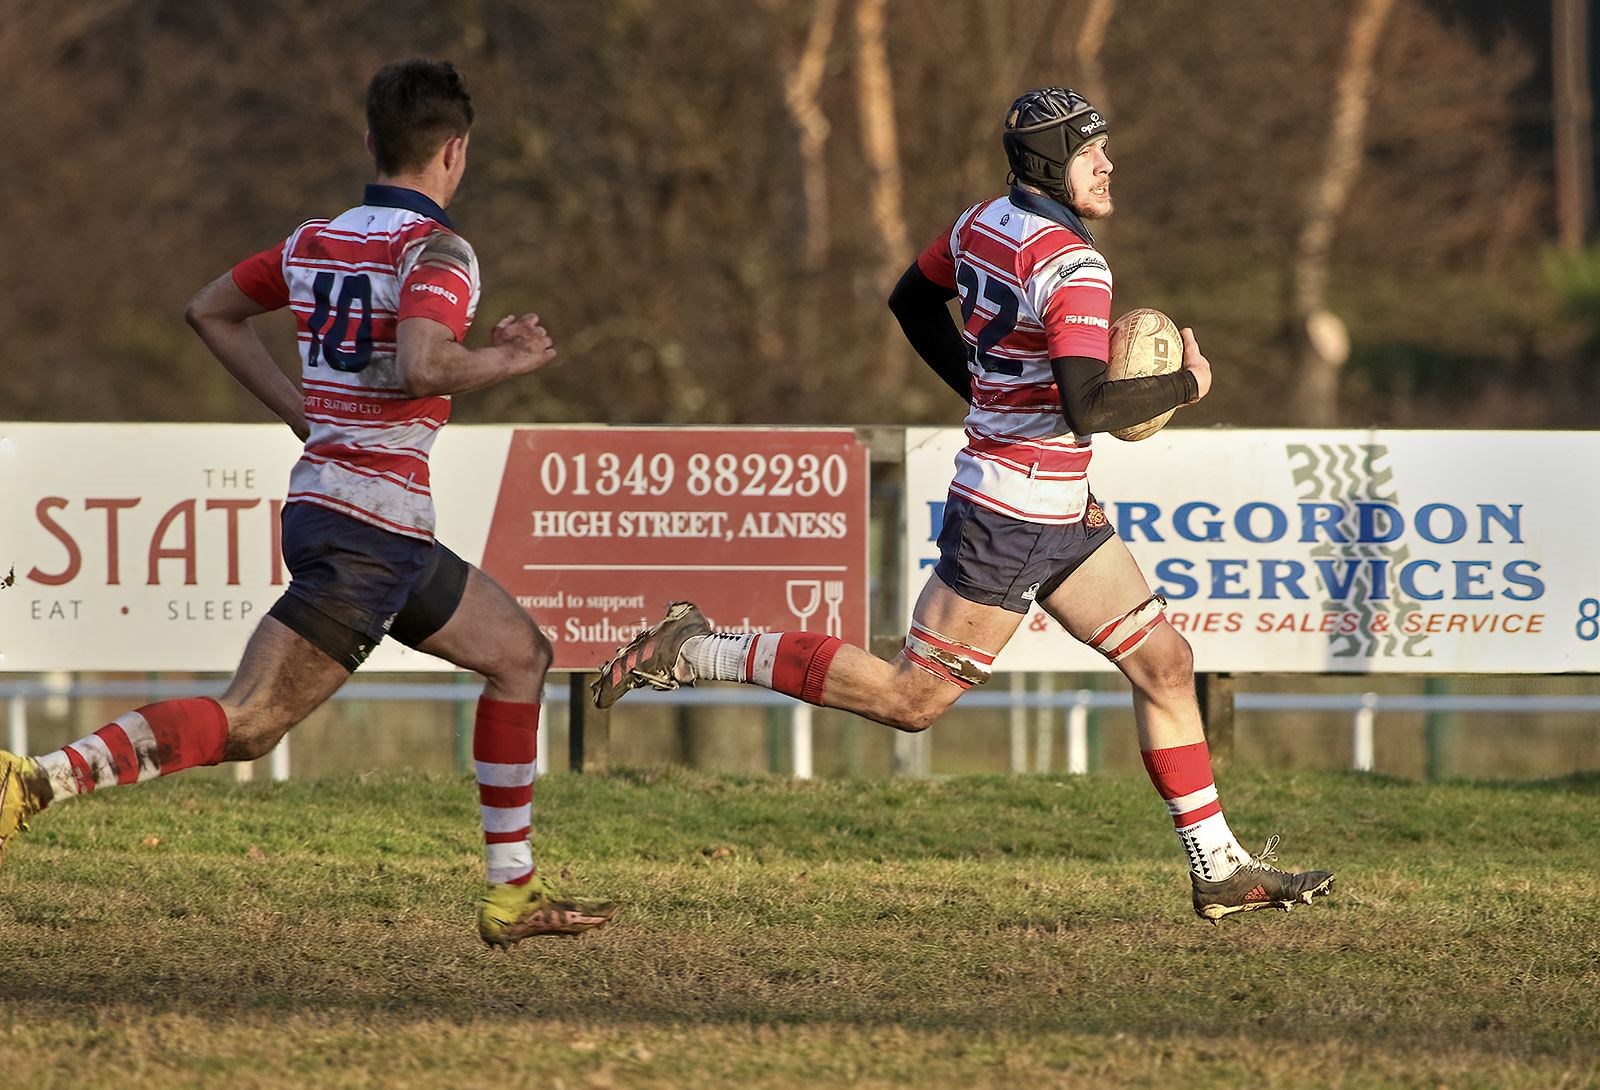 Cameron Morrison Smith runs in last try. Rory Millar in support